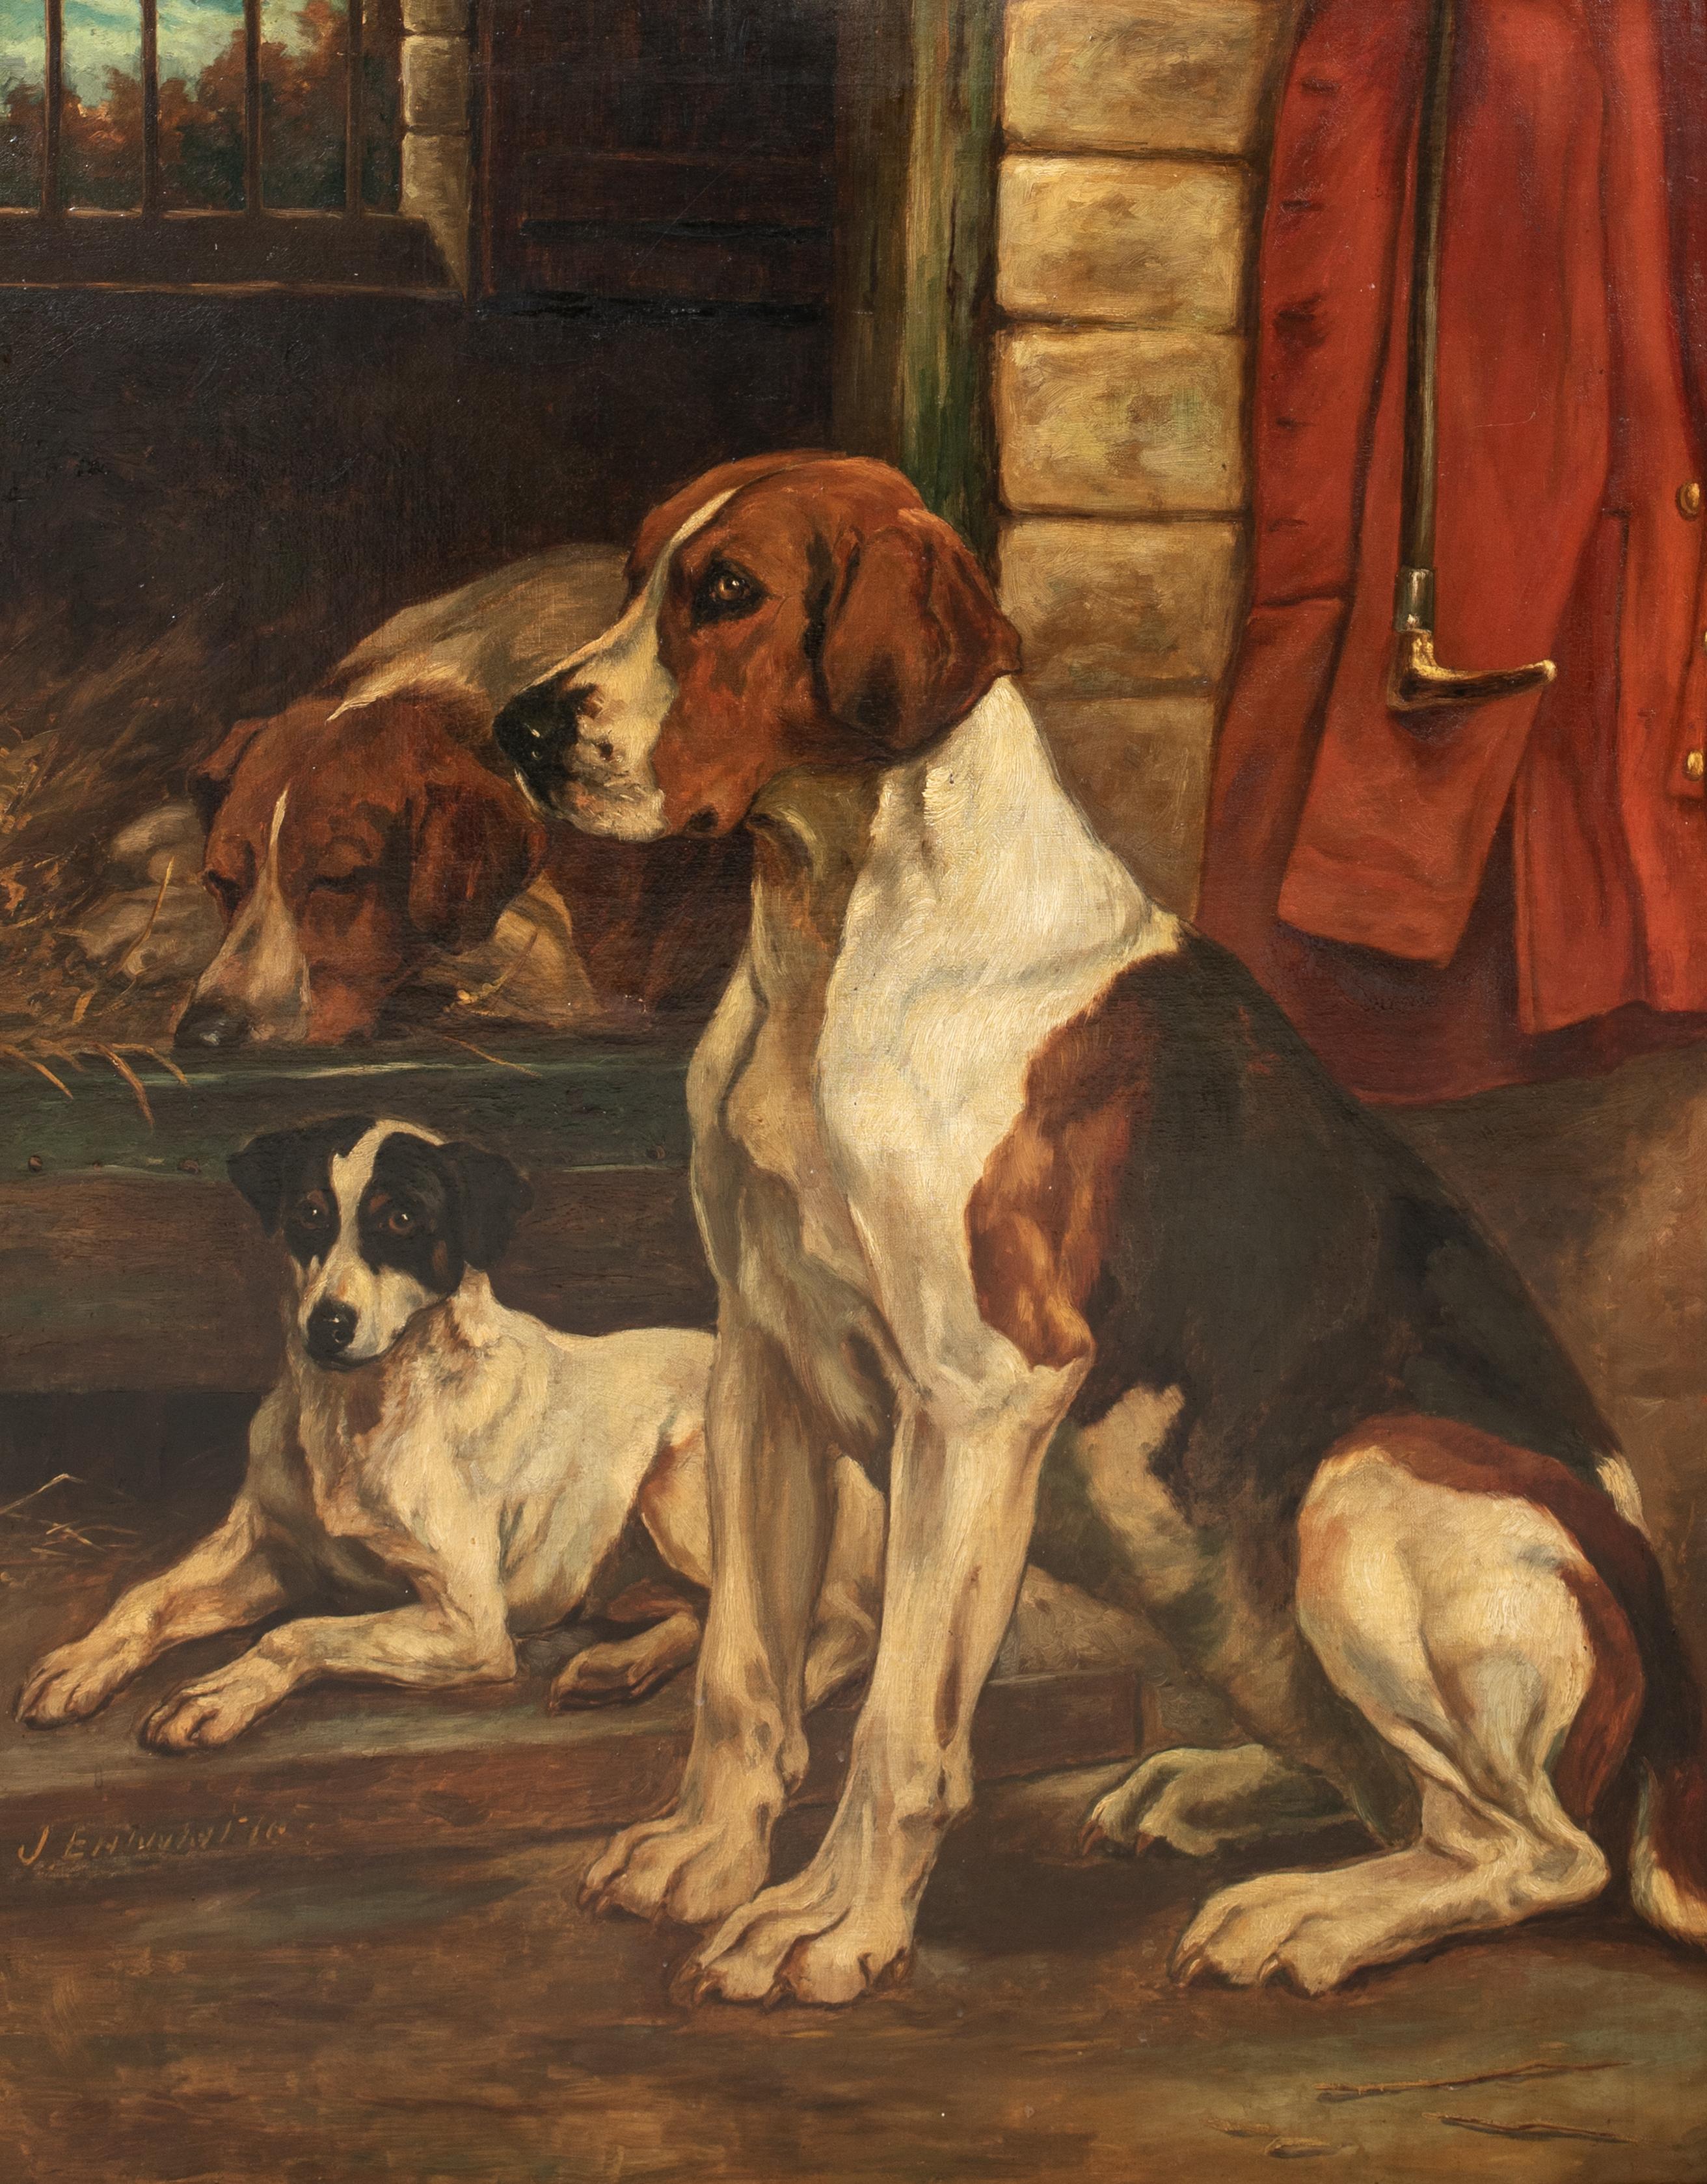 Fox Hounds & Jack Russell Terrier In The Kennels, 19th Century

by John C Entwistle (1842-1899)

Large 19th Century English kennel scene with the fox hounds and a terrier resting, oil on canvas by John C Entwistle. Superb quality and condition circa